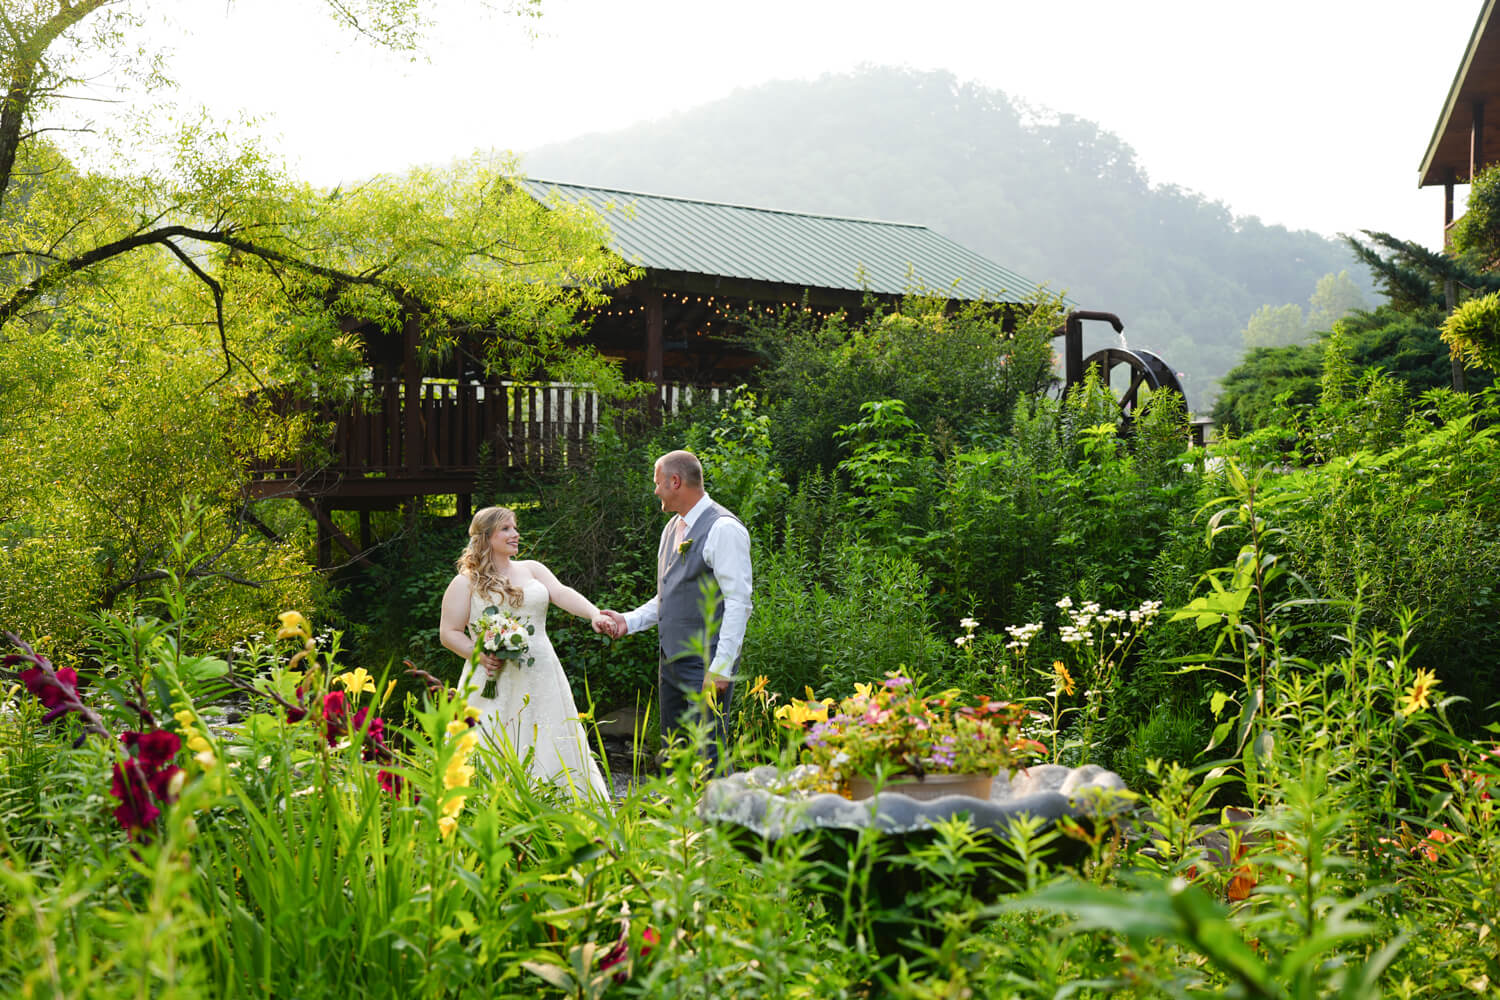 Couple holding hands on their wedding day in the summer flower garden at Honeysuckle Hills with a hazy mountain ridge and water wheel in the background